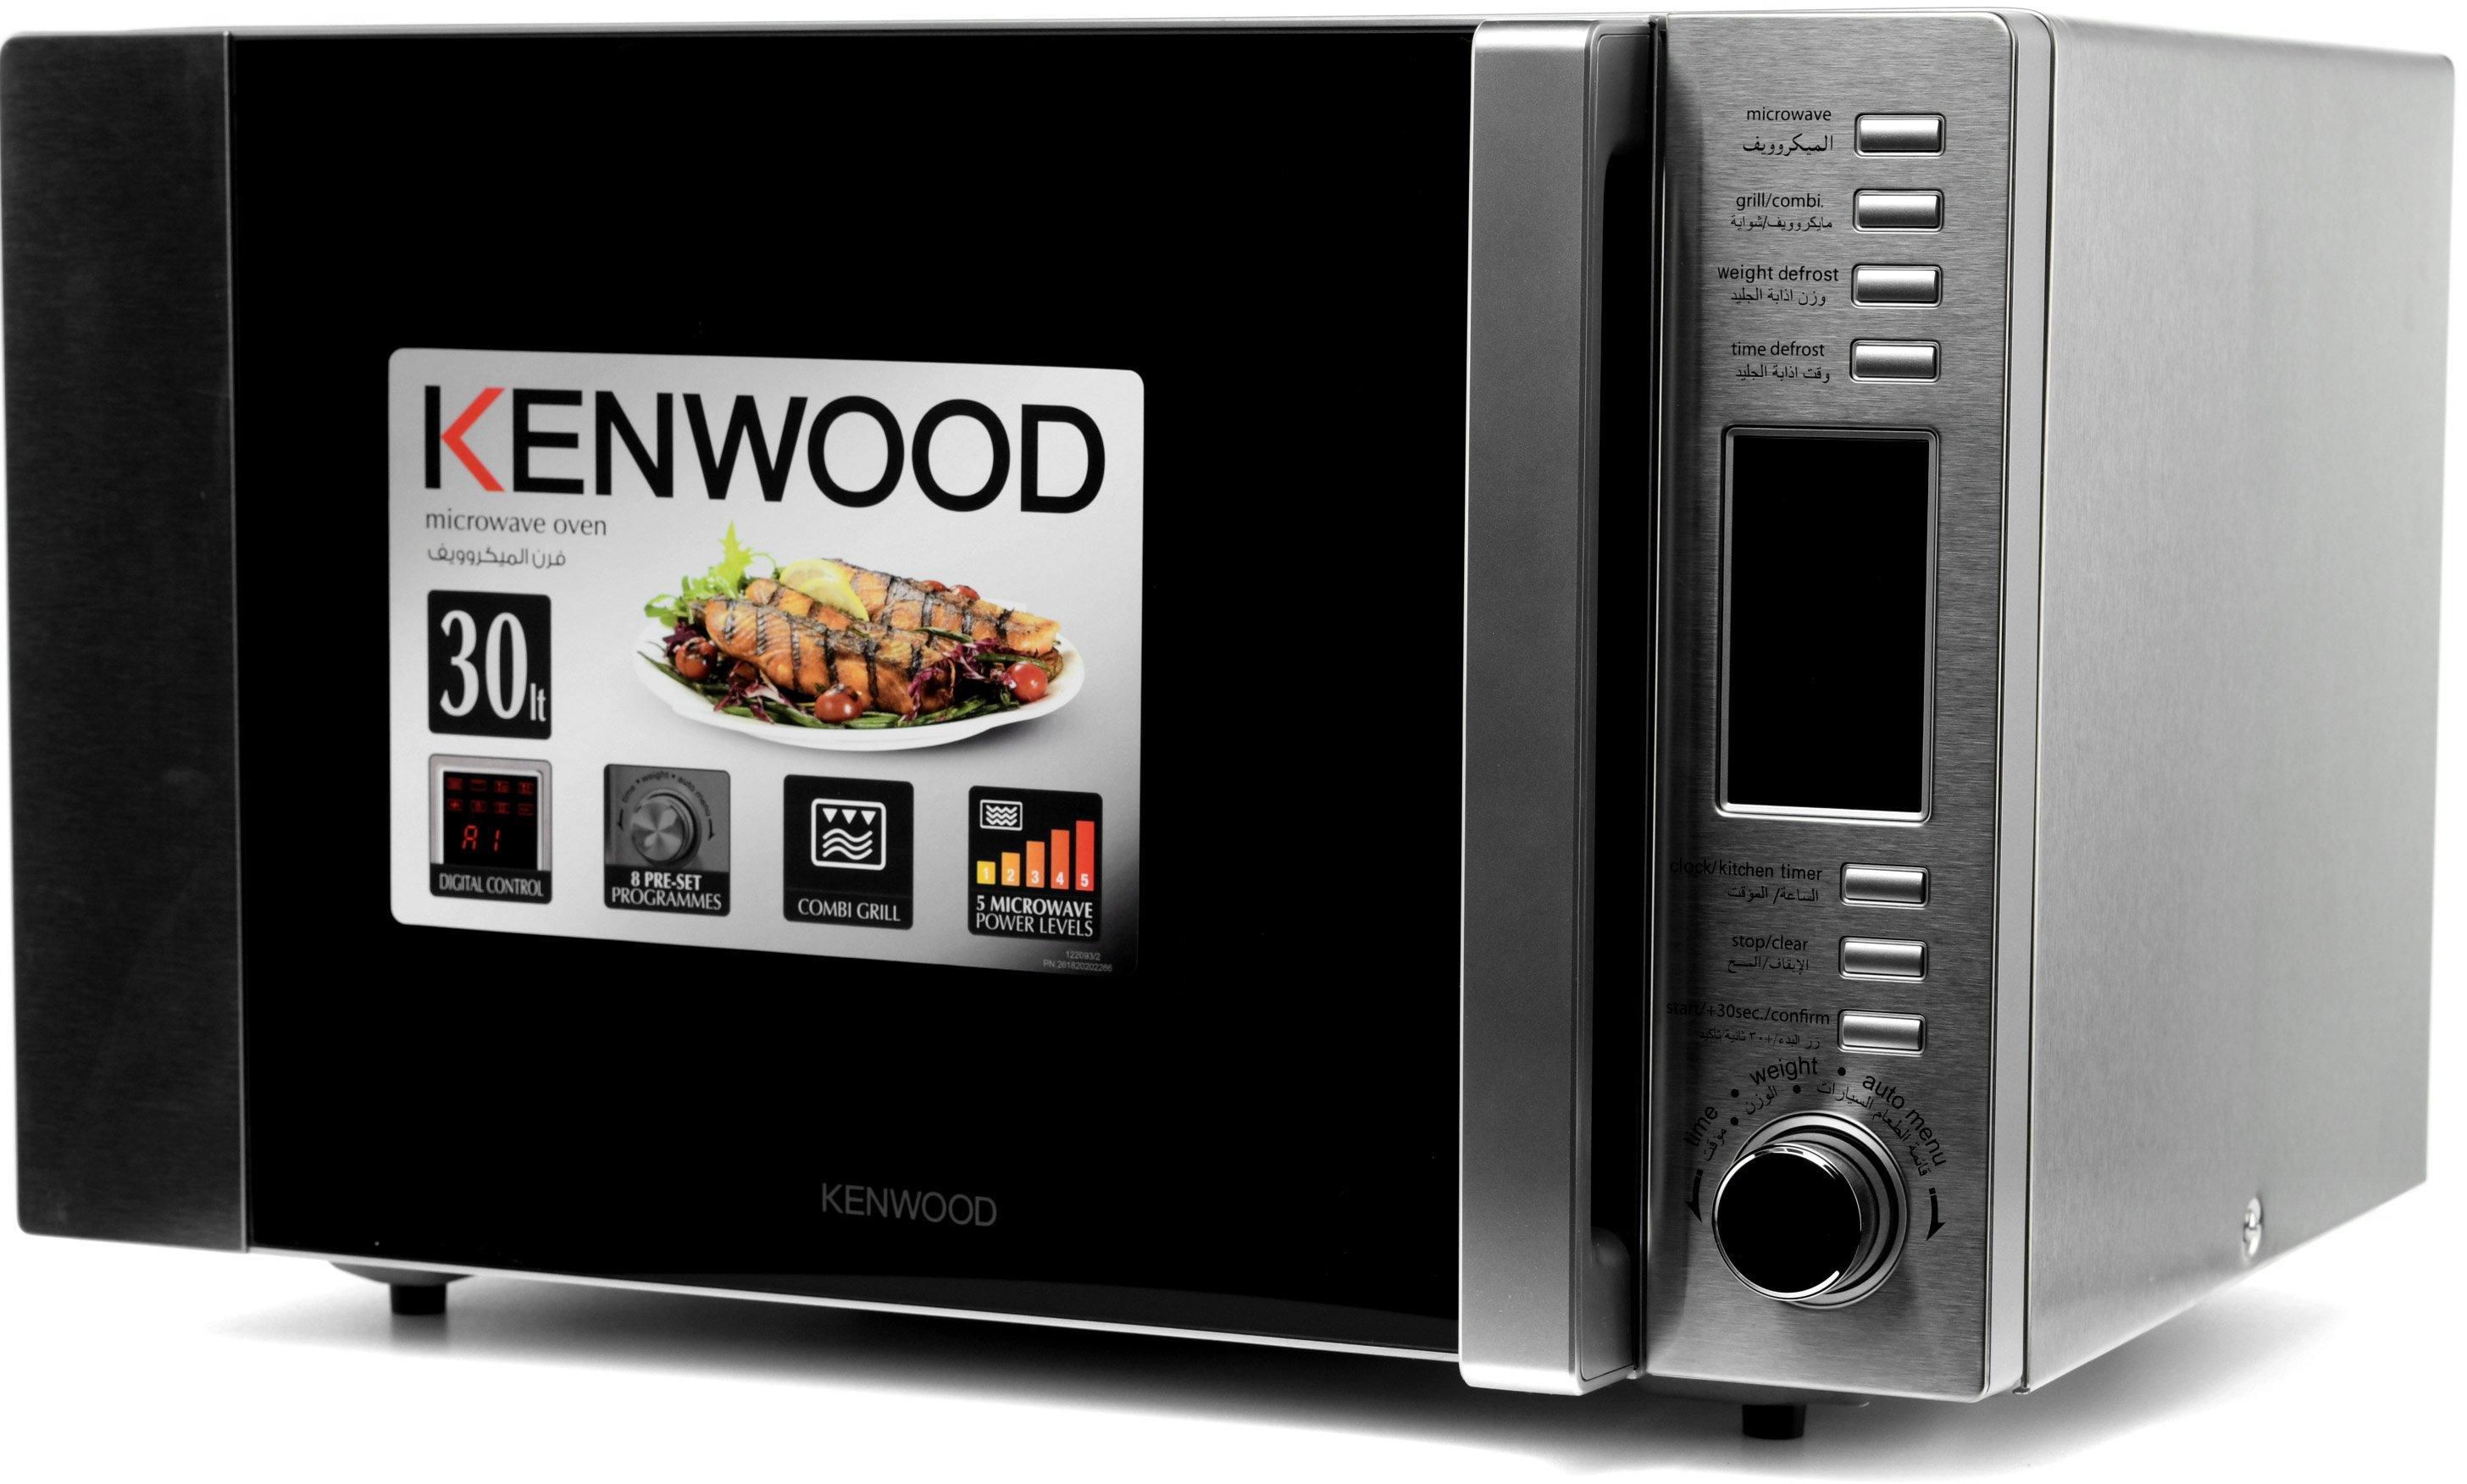 Kenwood, Microwave Oven, 30L, Silver price from extrastores in Saudi